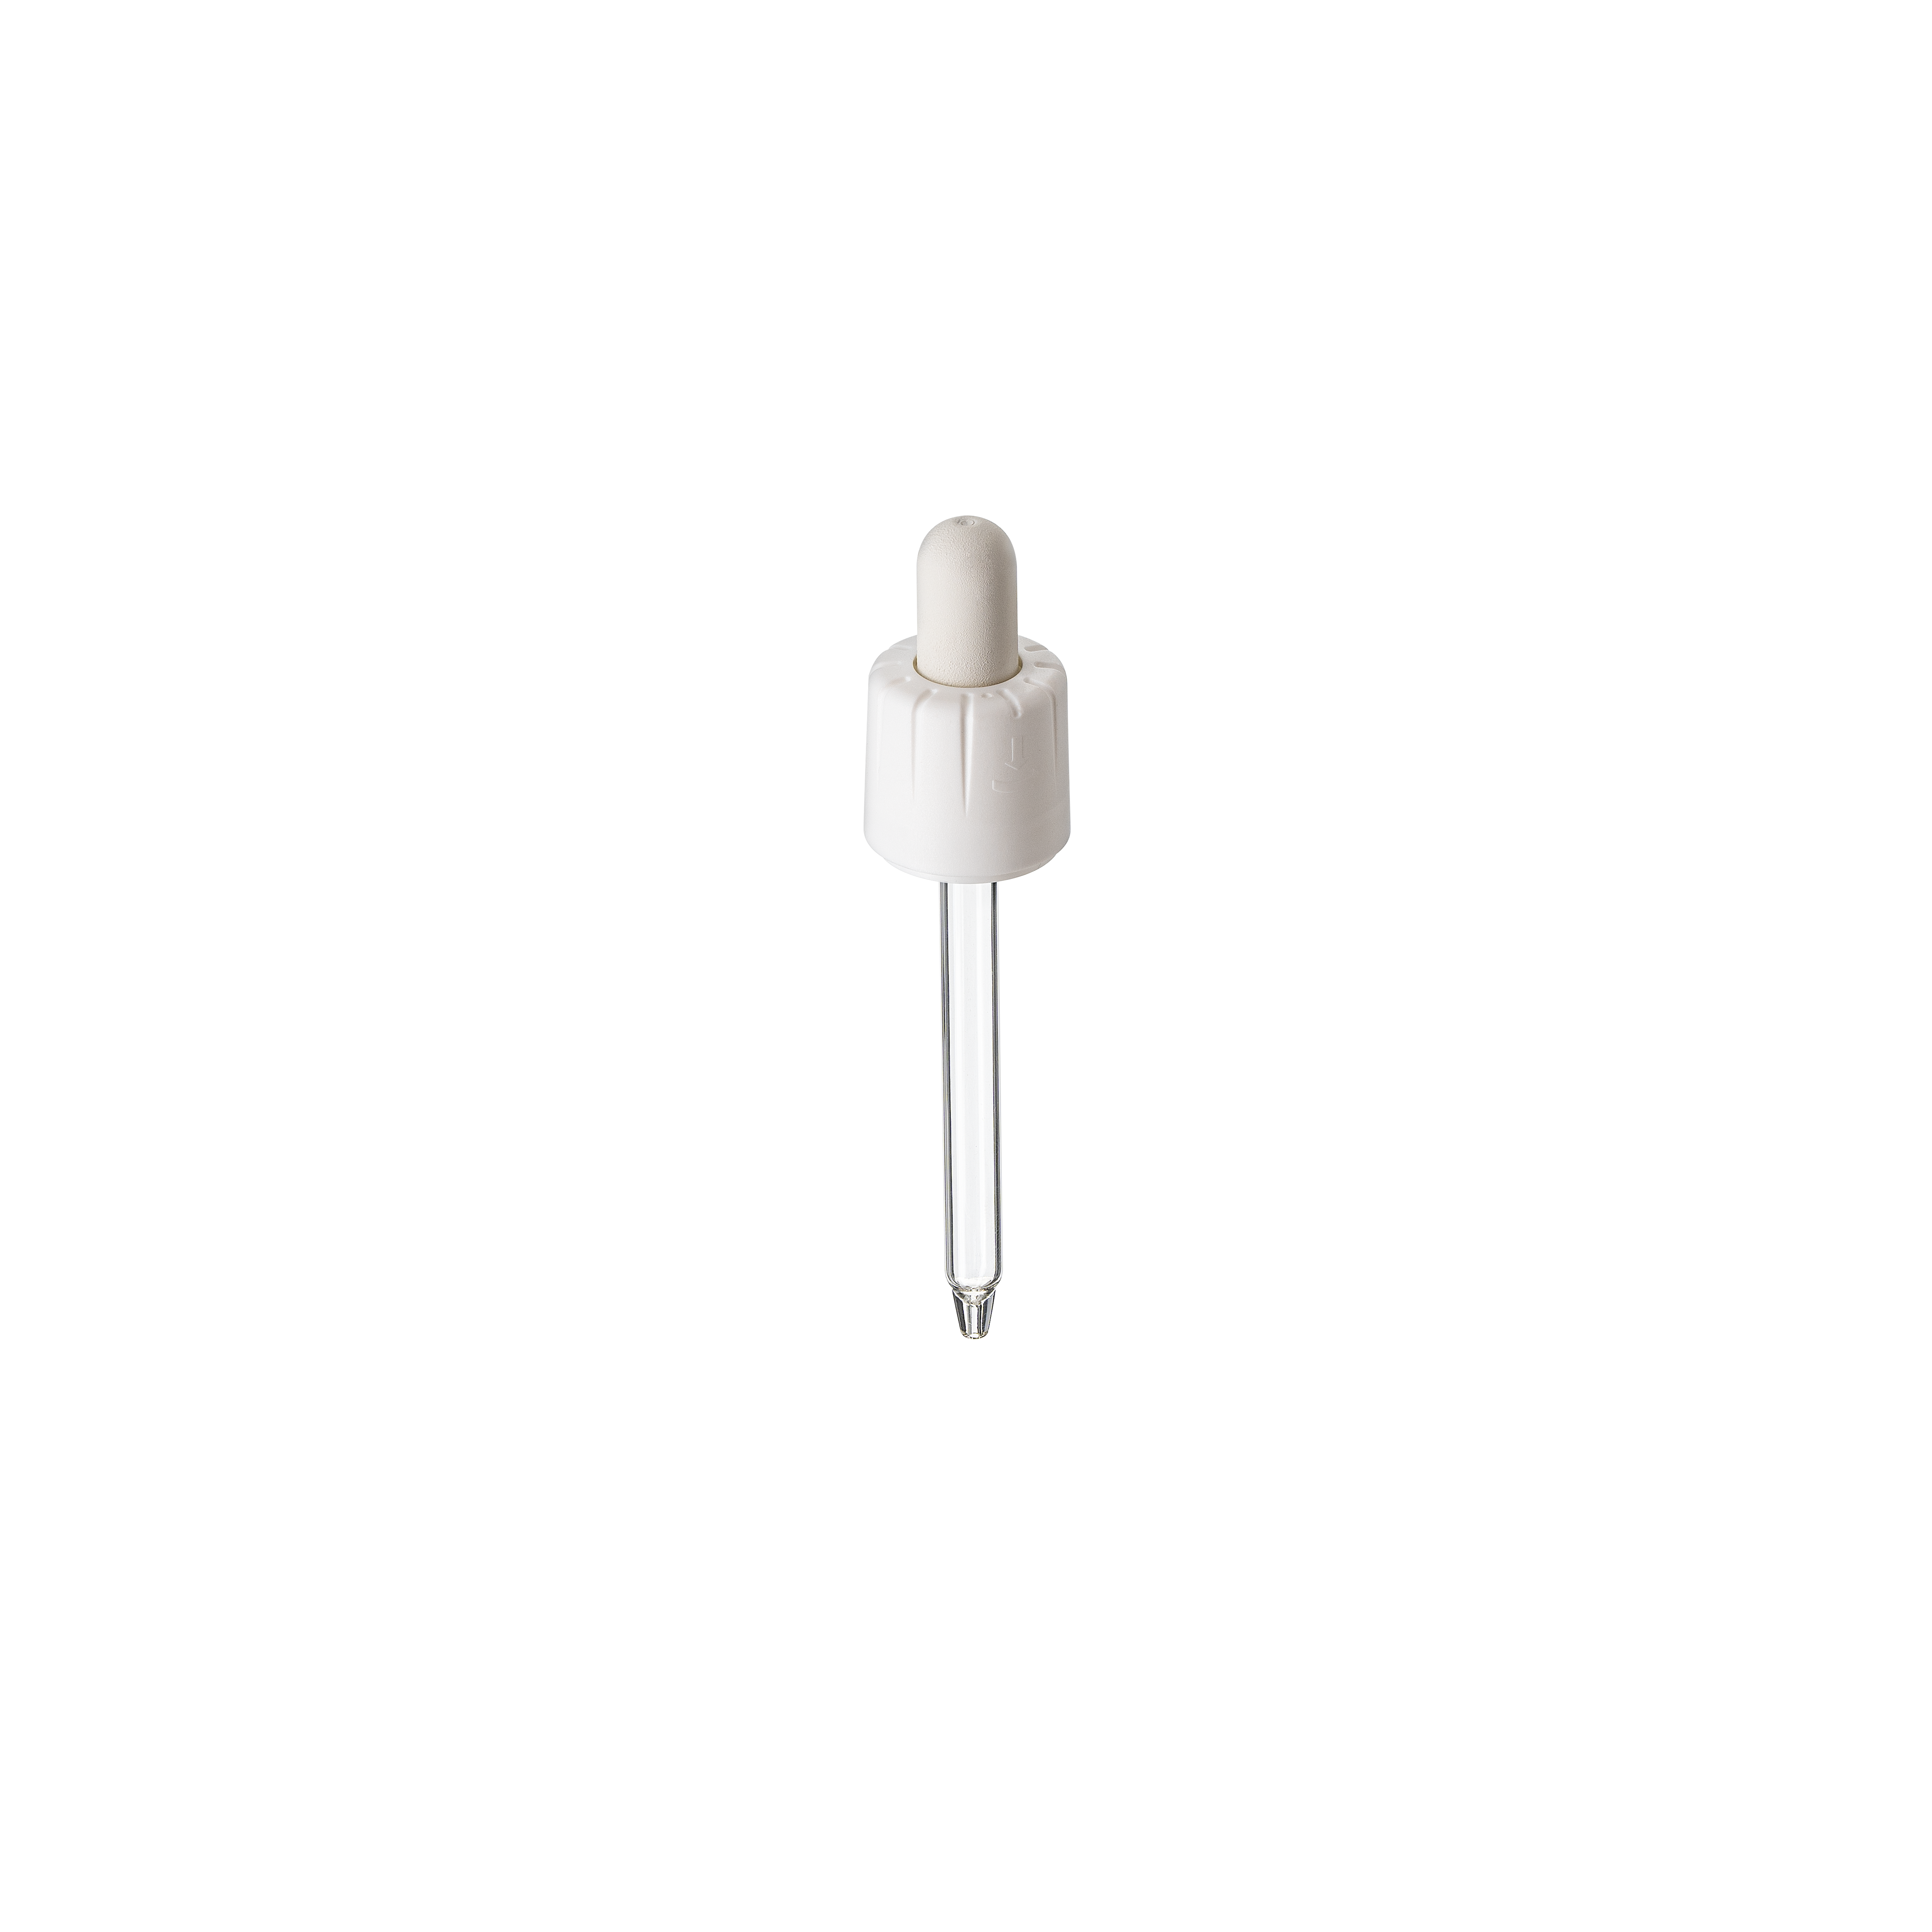 Pipette child-tamper evident, DIN18, II, PP/PEHD, white, bulb NBR 1.0ml, conical tip (Ginger 50)